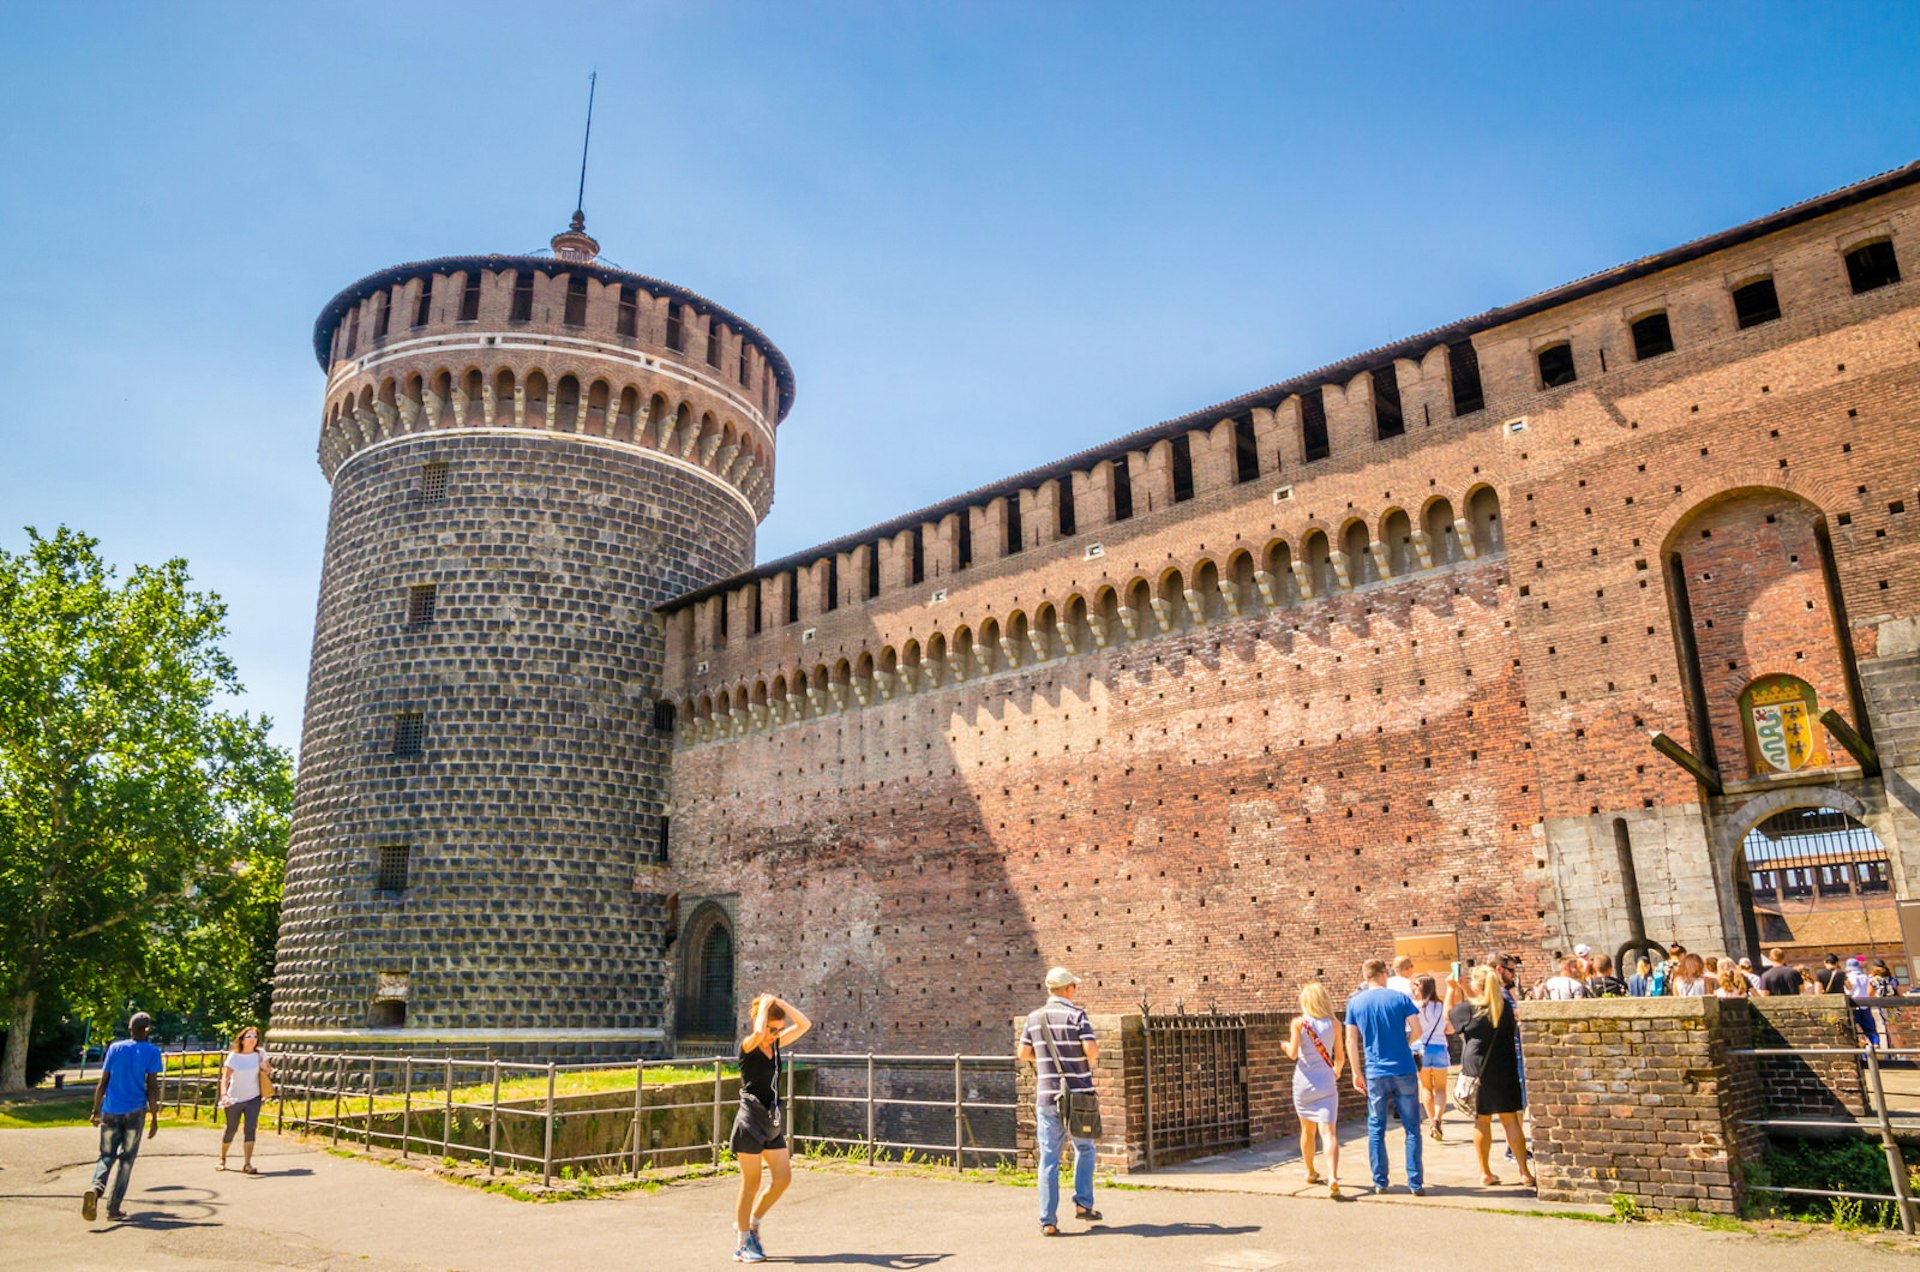 The Sforza Castle, a red-brick fortress with a tower; visitors are walking over a bridge across a moat into the castle.